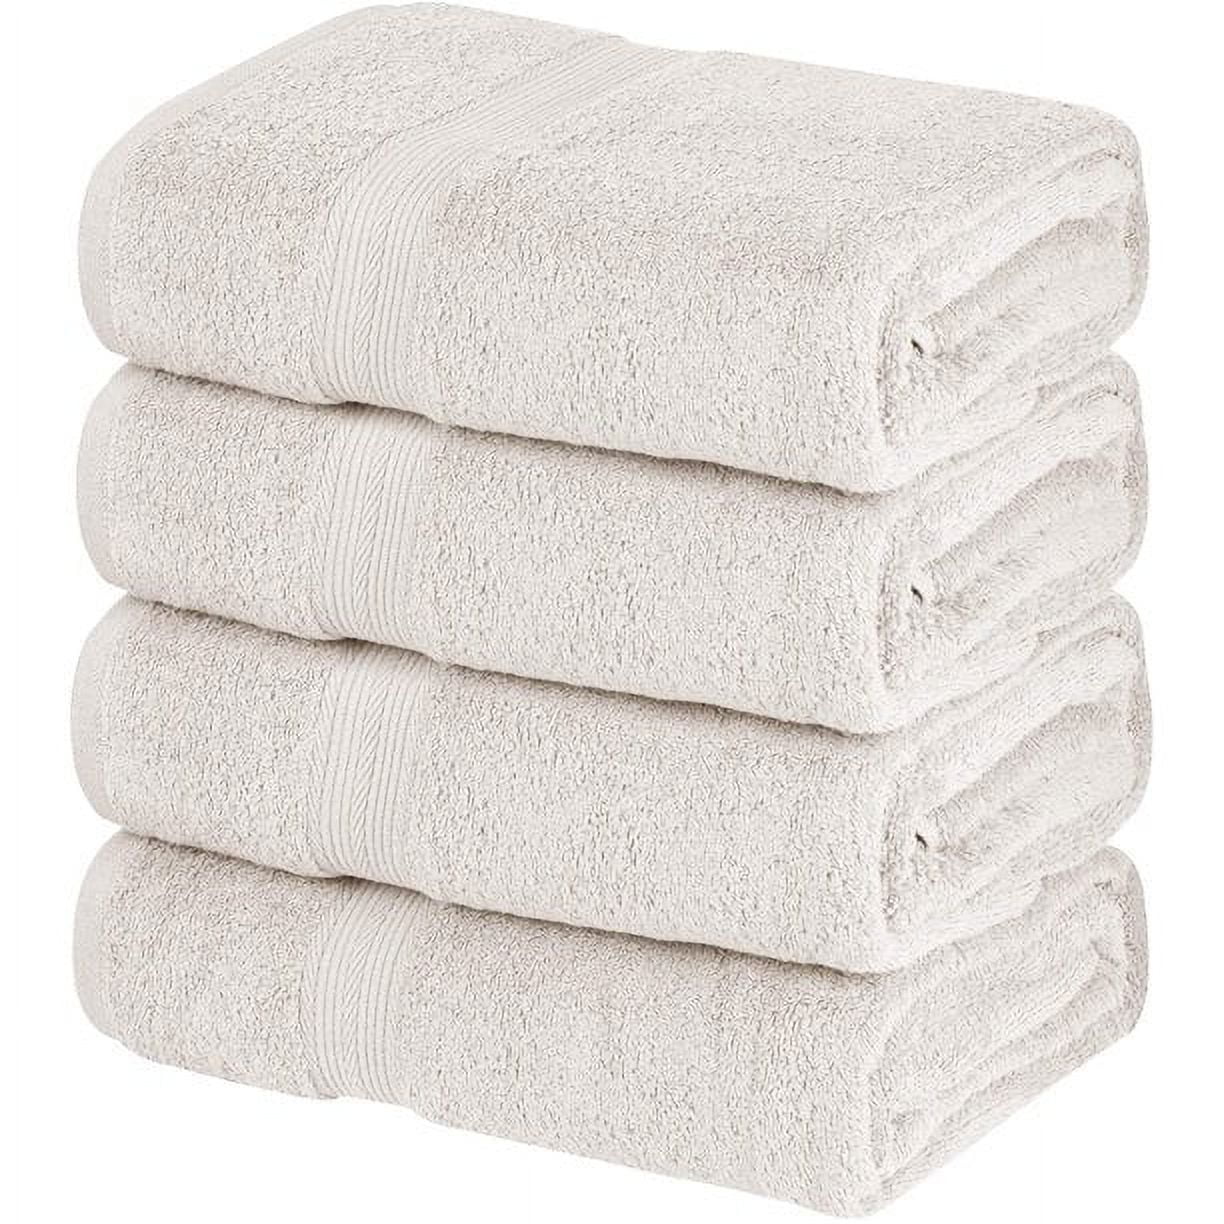 White Bath Towels 27 x 54 Quick-Dry High Absorbent 100% Turkish Cotton  Towel for Bathroom, Guests, Pool, Gym, Camp, Travel, College Dorm (White, 4